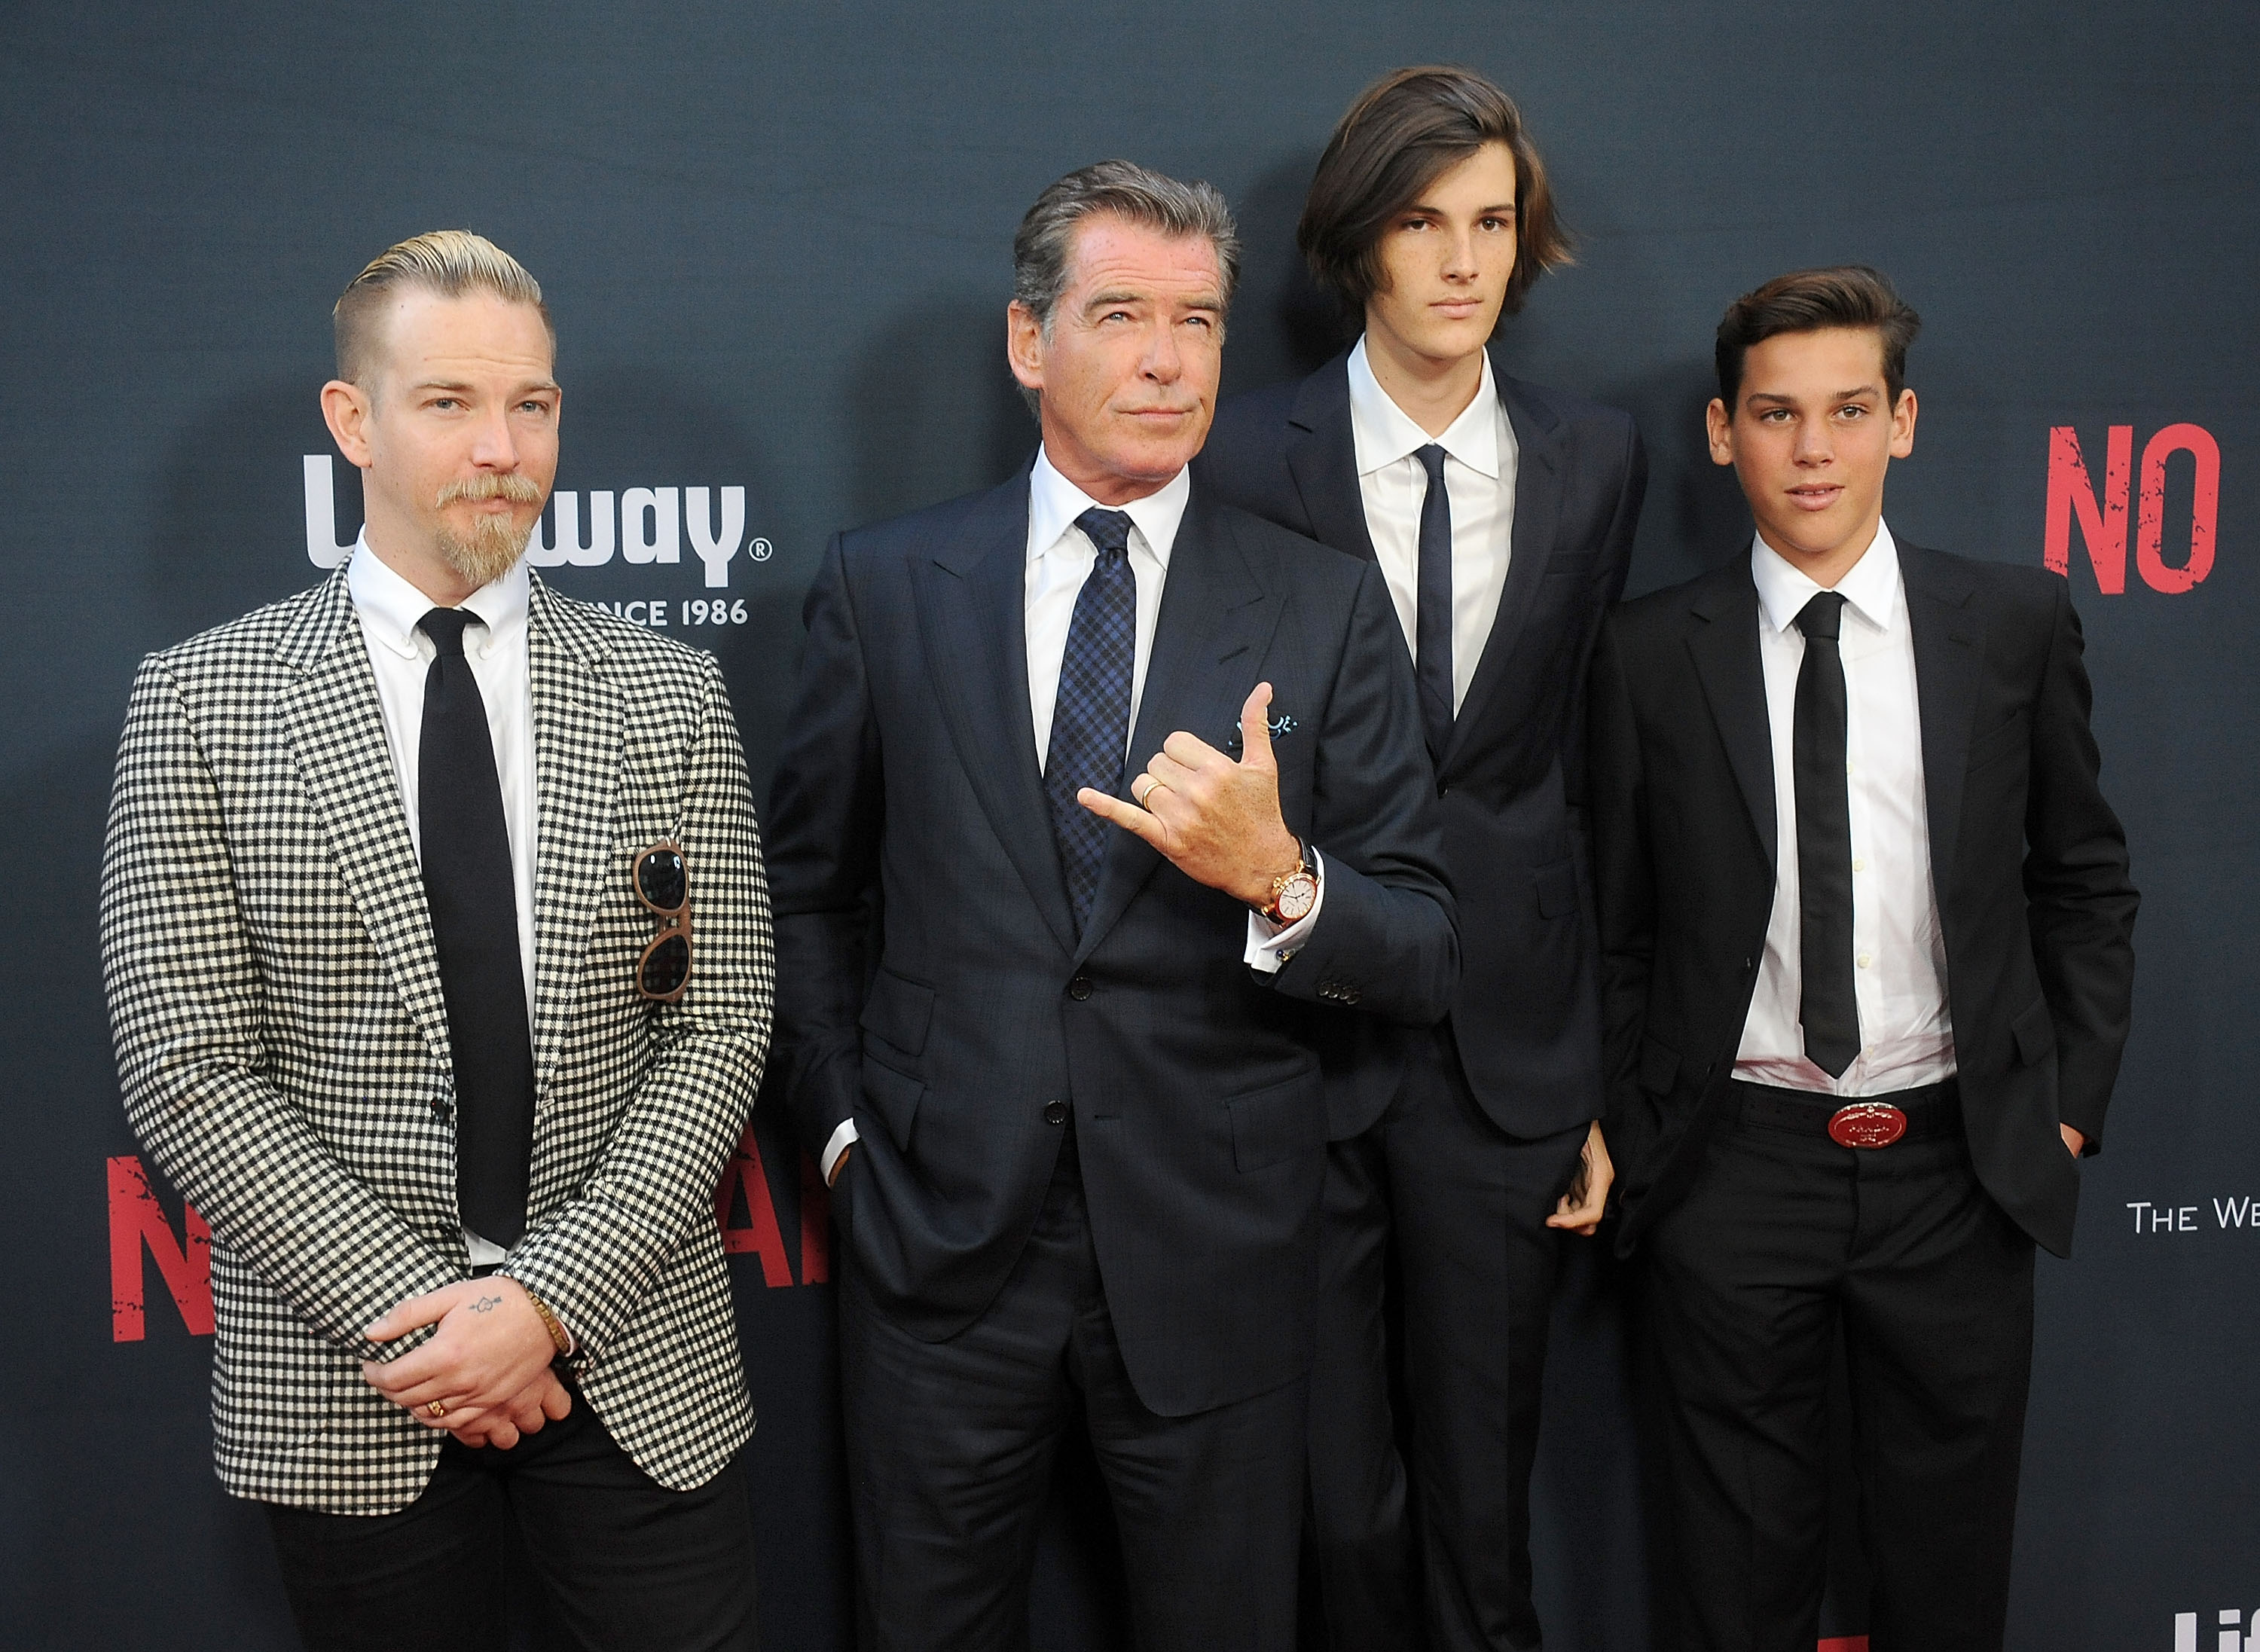 Sean Brosnan, Pierce Brosnan, Dylan Brosnan and Paris Brosnan arrive at the premiere of The Weinstein Company's "No Escape" at Regal Cinemas L.A. Live on August 17, 2015  | Source: Getty Images